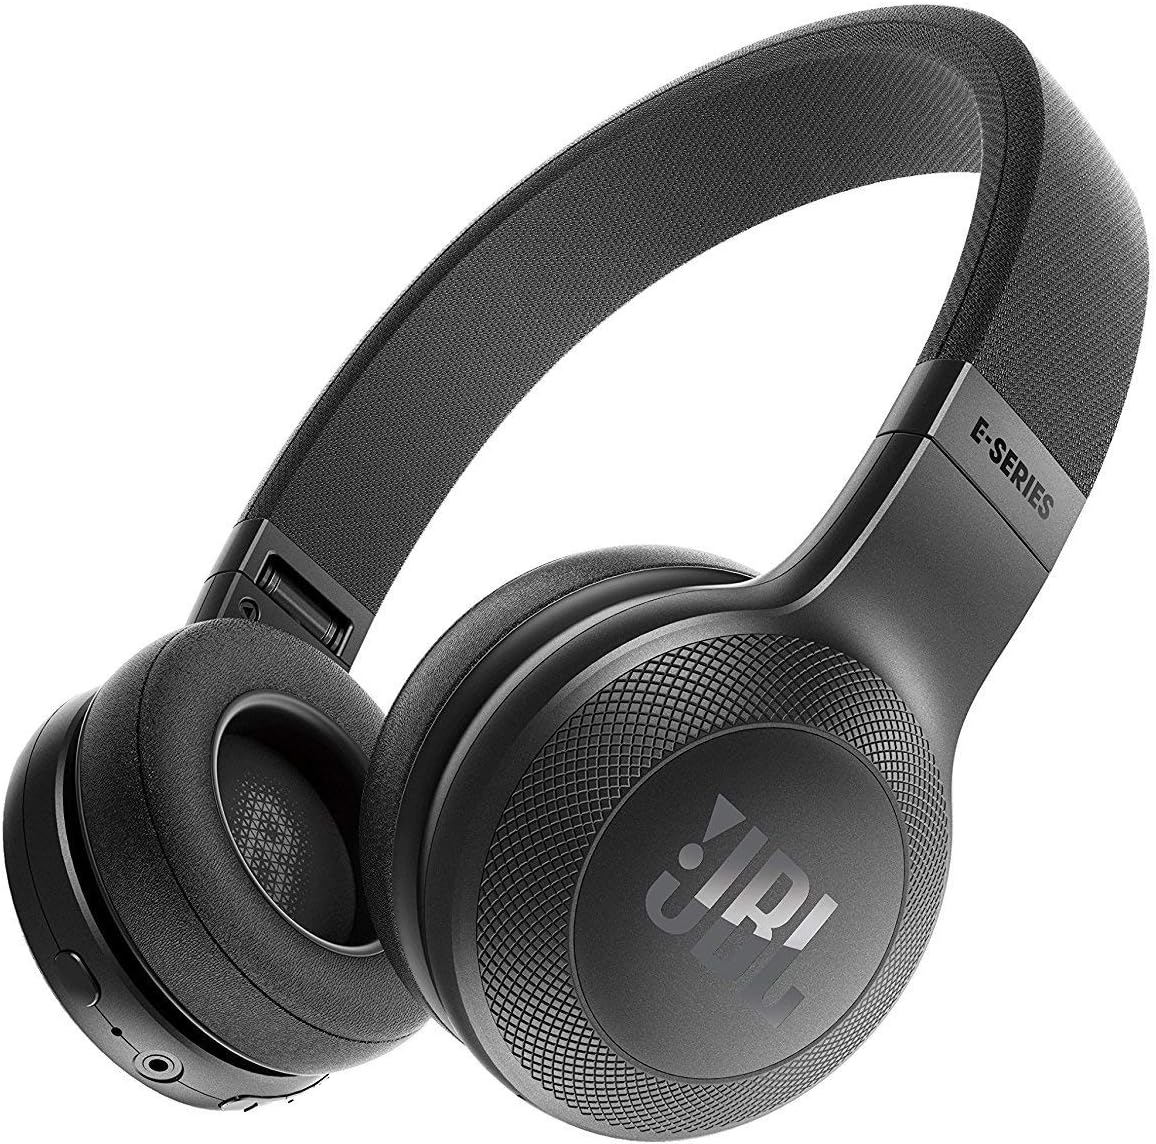 How To Charge JBL Headphones Without Charger?